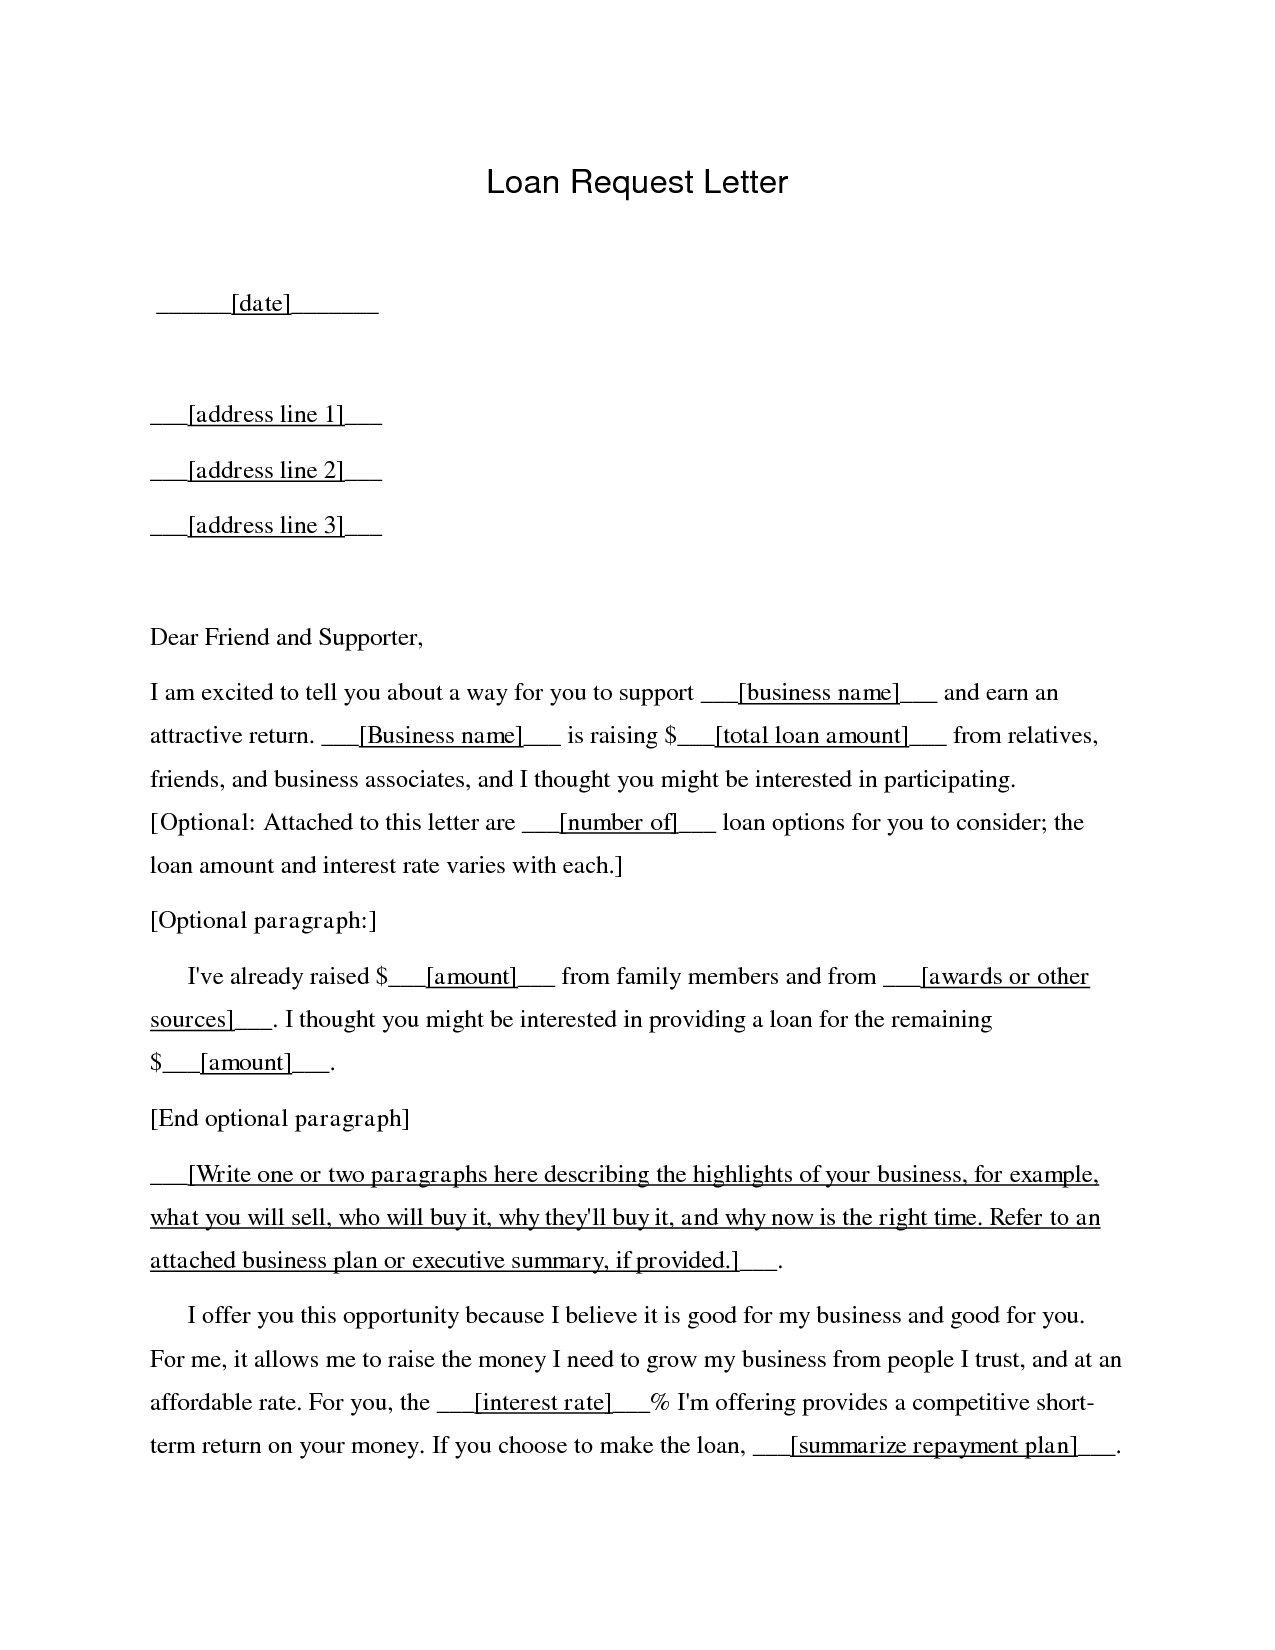 Loan Application Letter Sample - Free Printable Documents